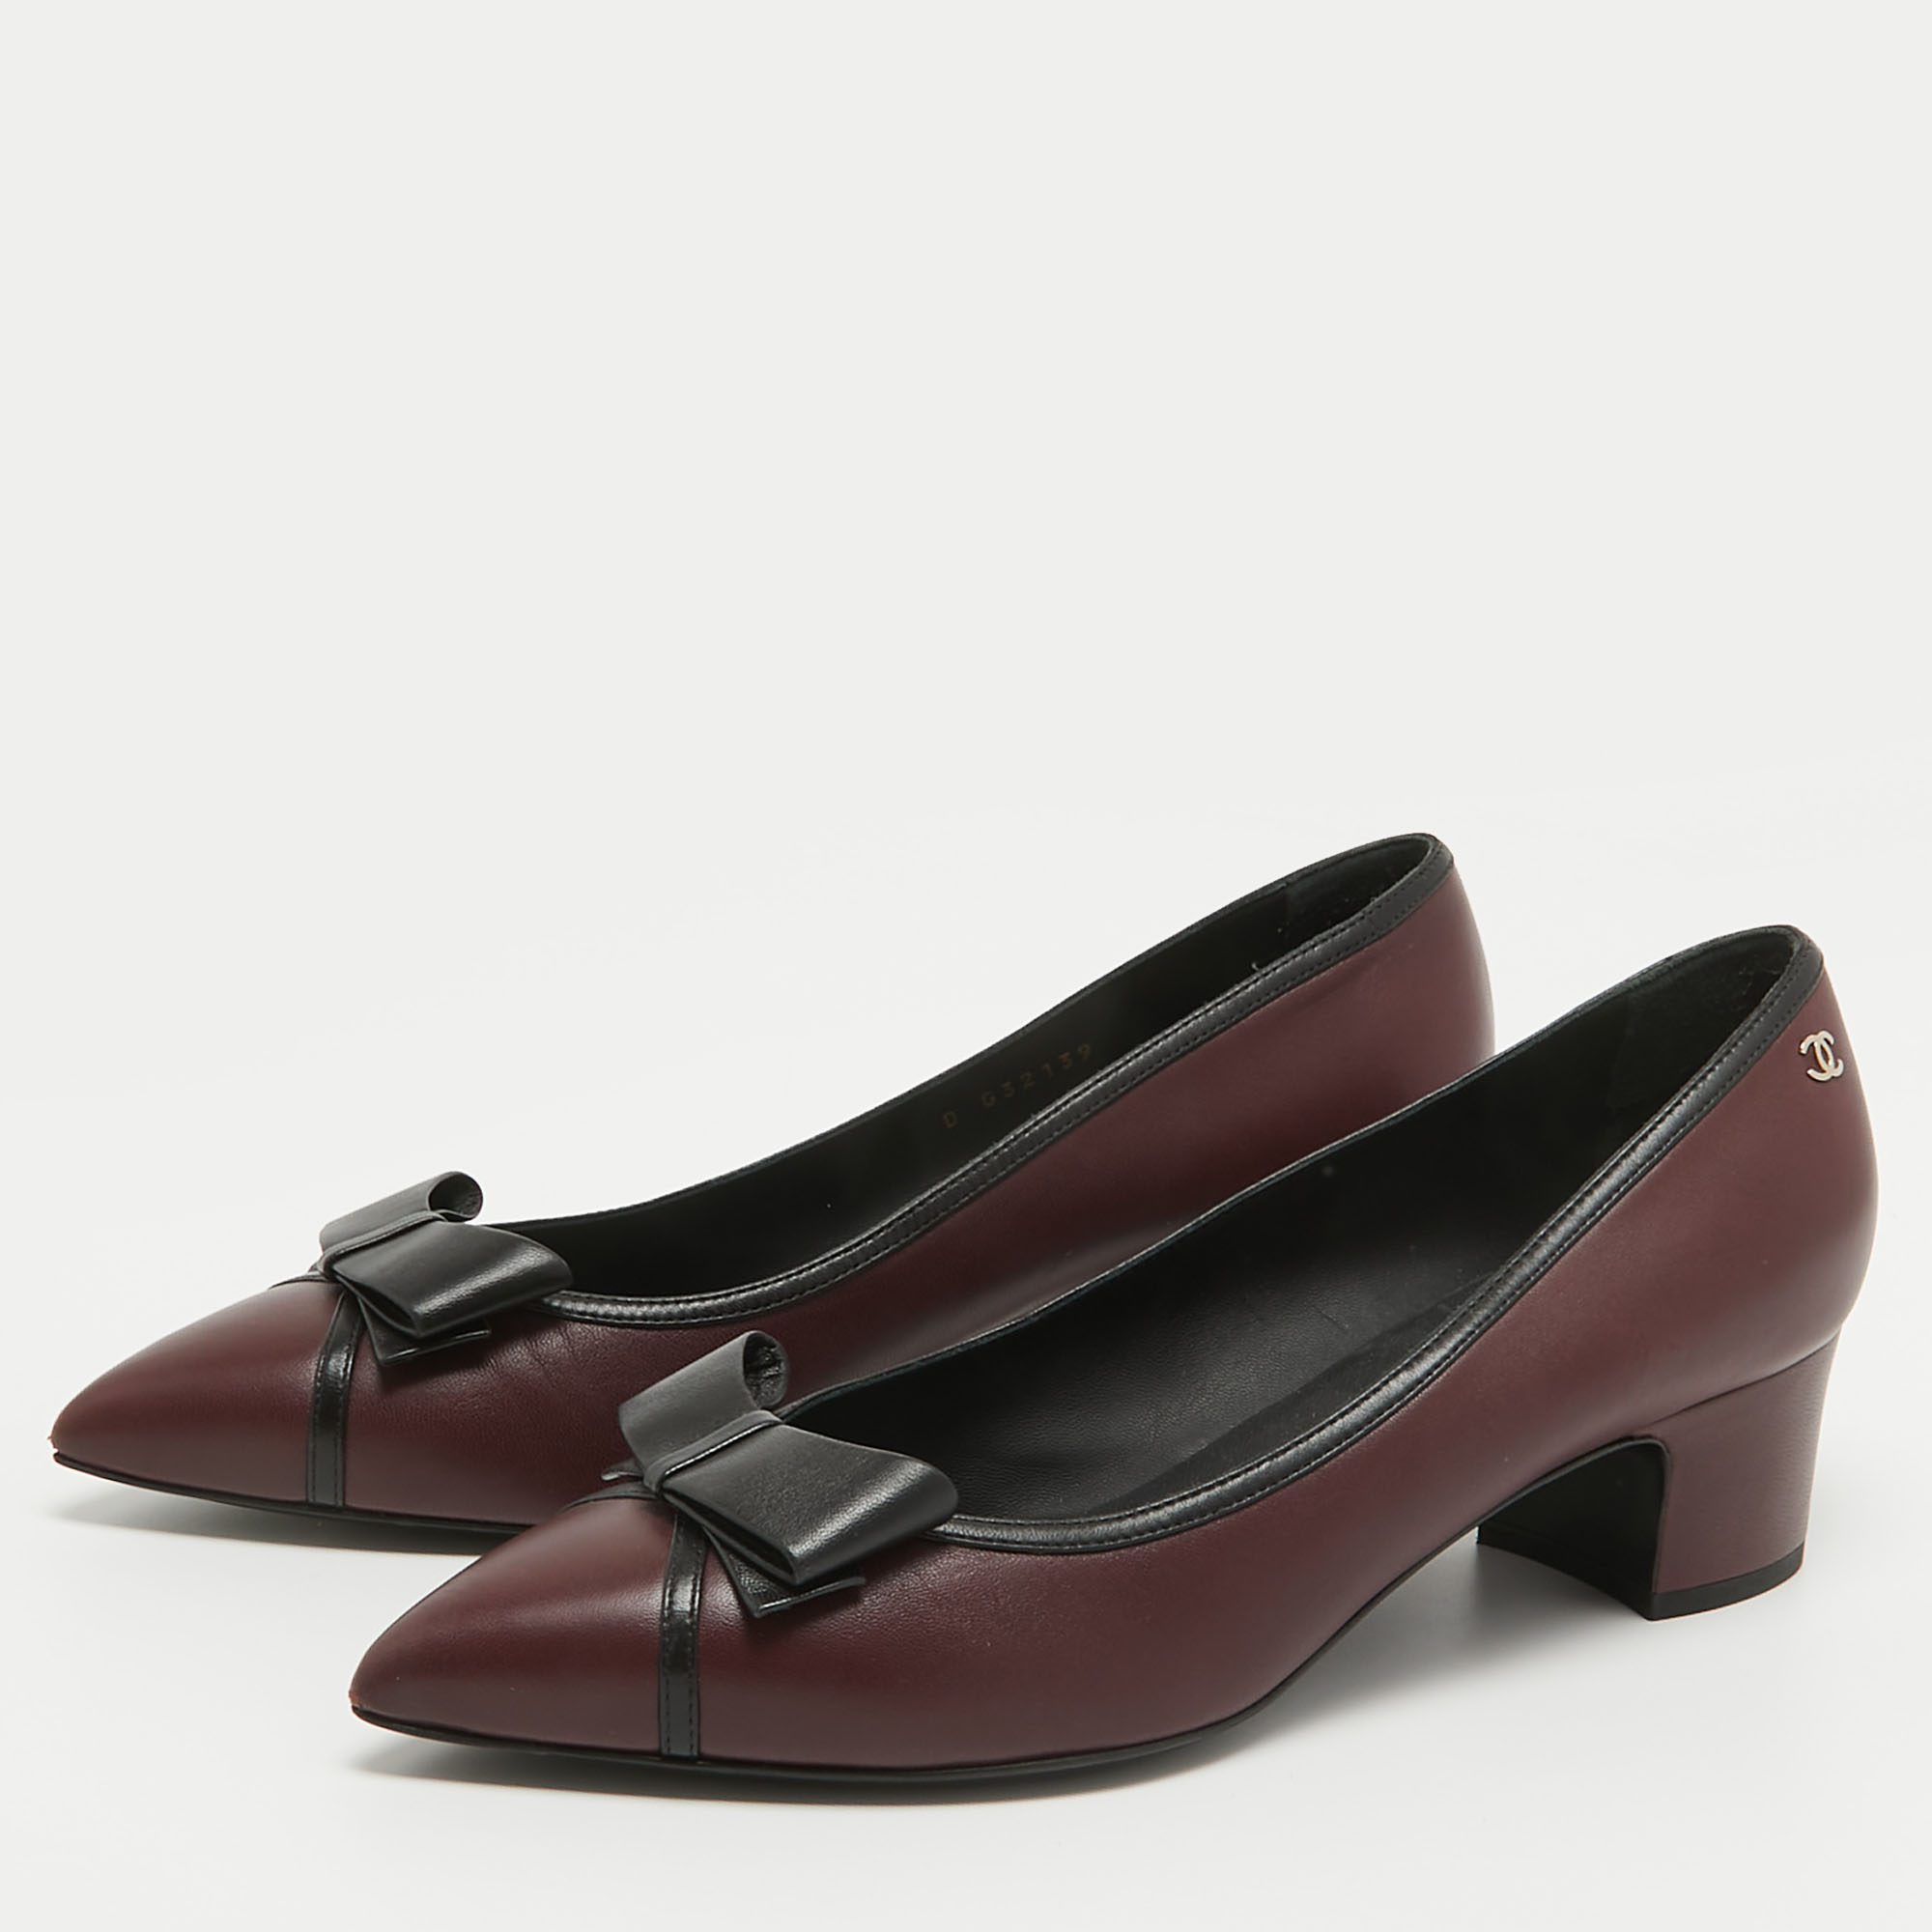 

Chanel Burgundy/Black Leather Bow CC Pointed Toe Pumps Size